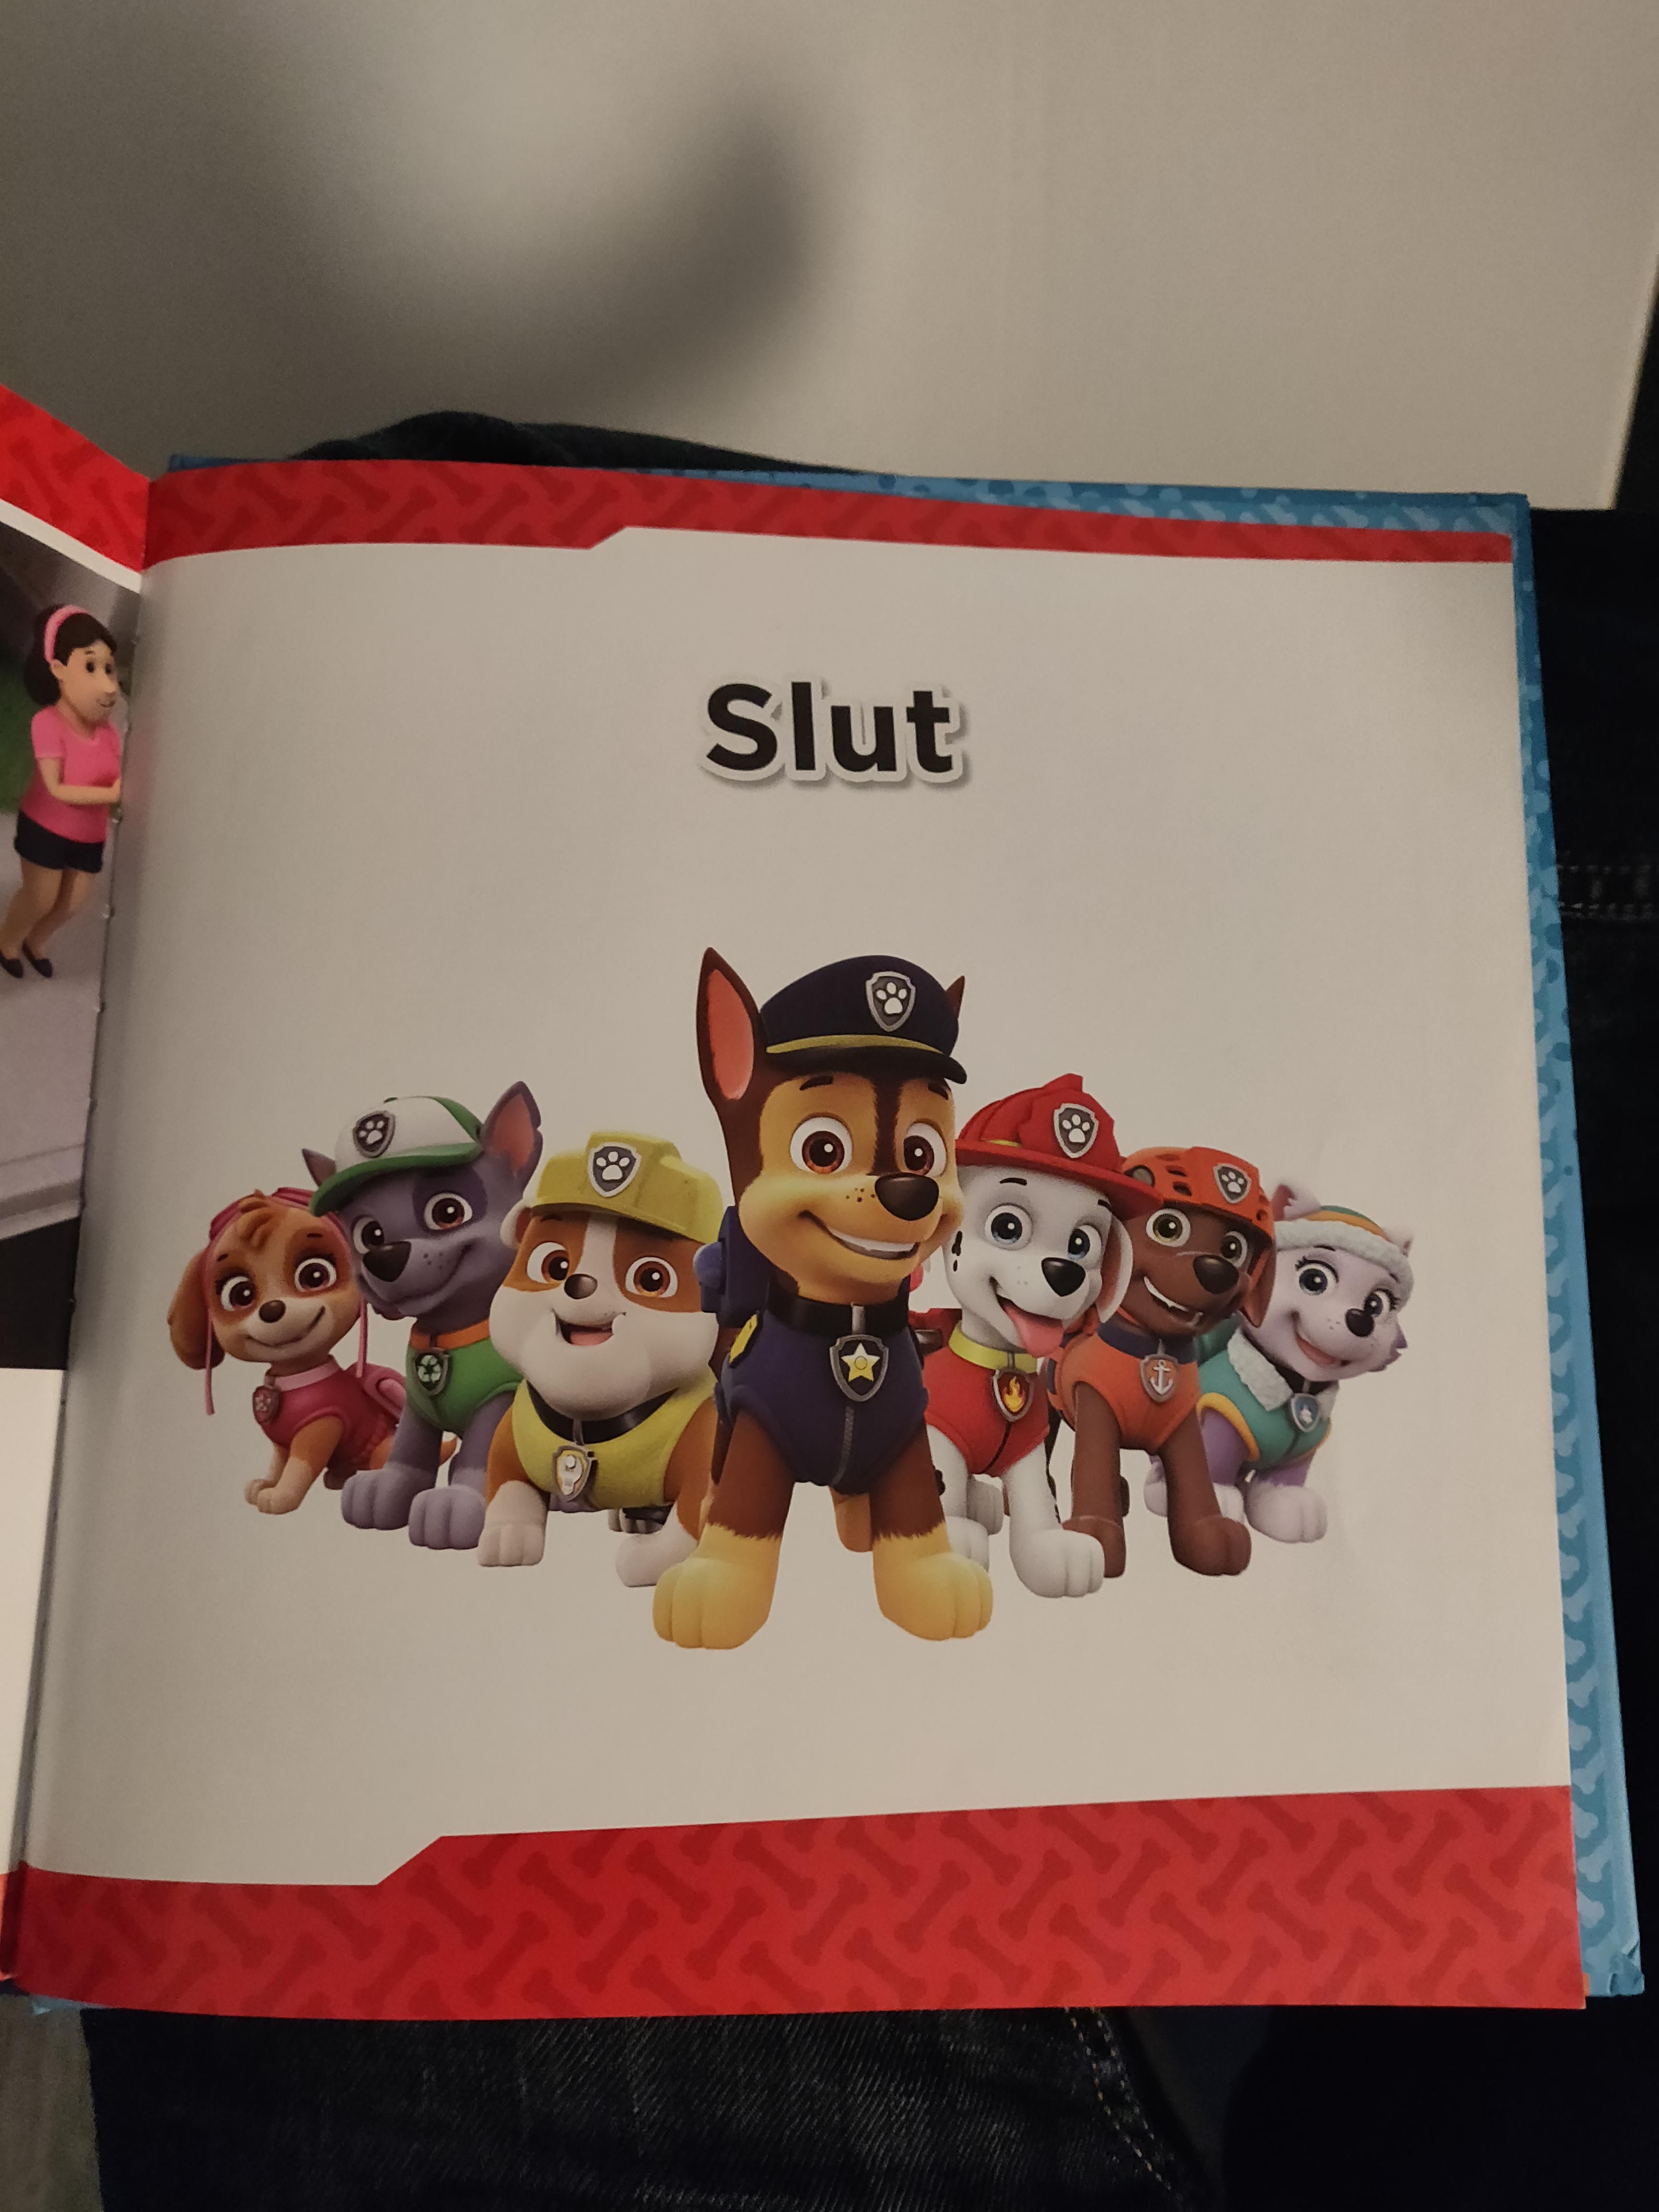 This is how my daughter's Paw Patrol book ends.